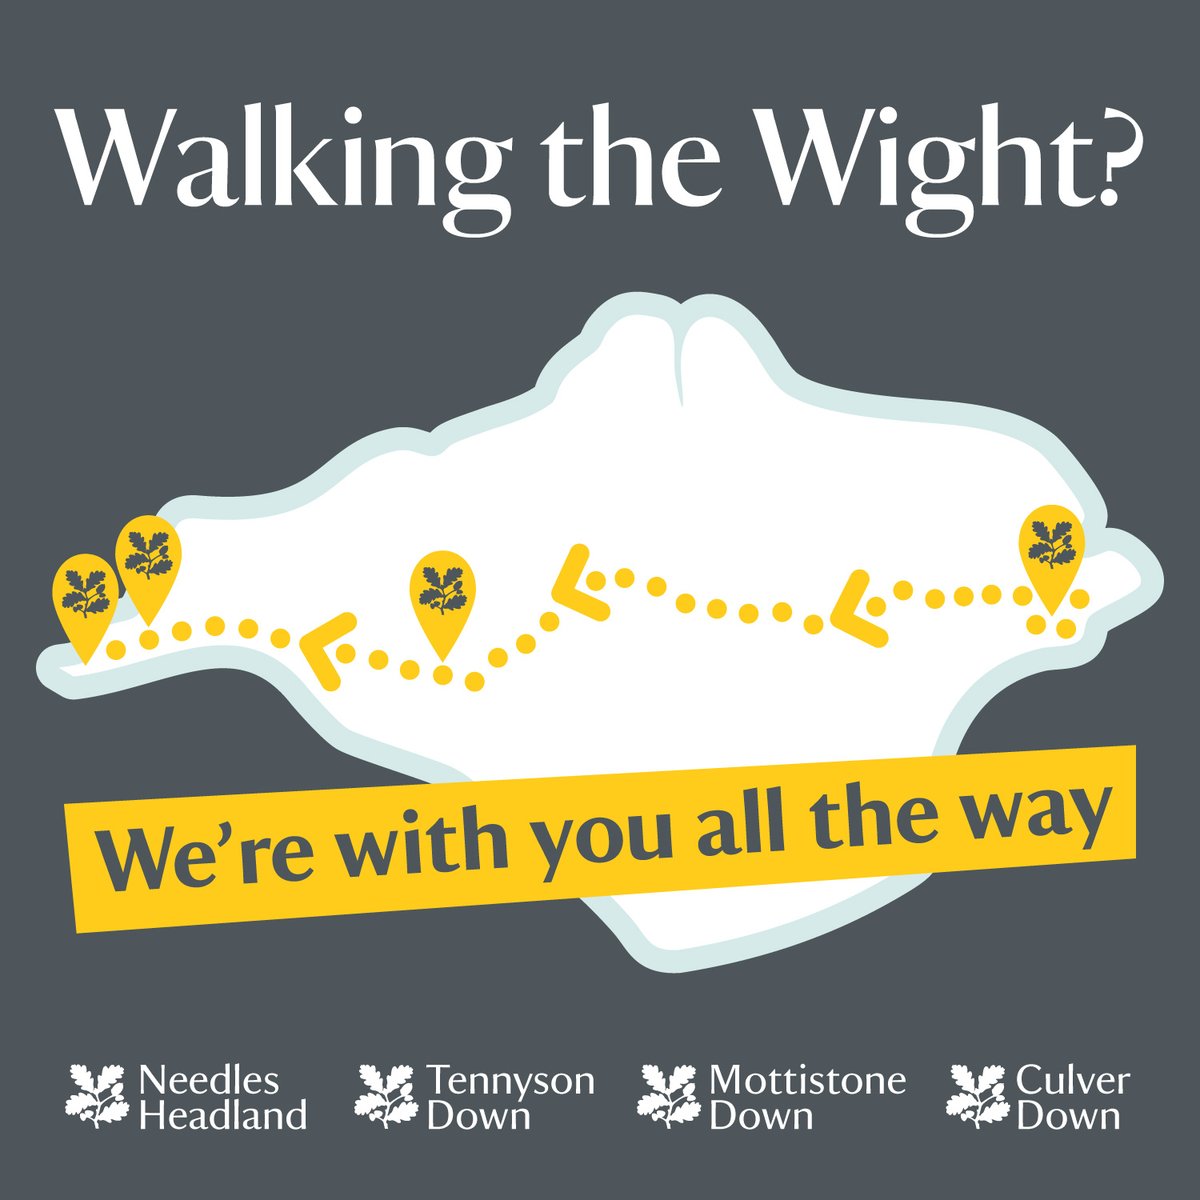 Good luck to those taking part in @MountbattenIW #WalkTheWight today. Did you know you'll pass through countryside we care for on #CulverDown, #MottistoneDown, #TennysonDown & the #NeedlesHeadland? Look out for our team as you head through these areas. We're with you all the way